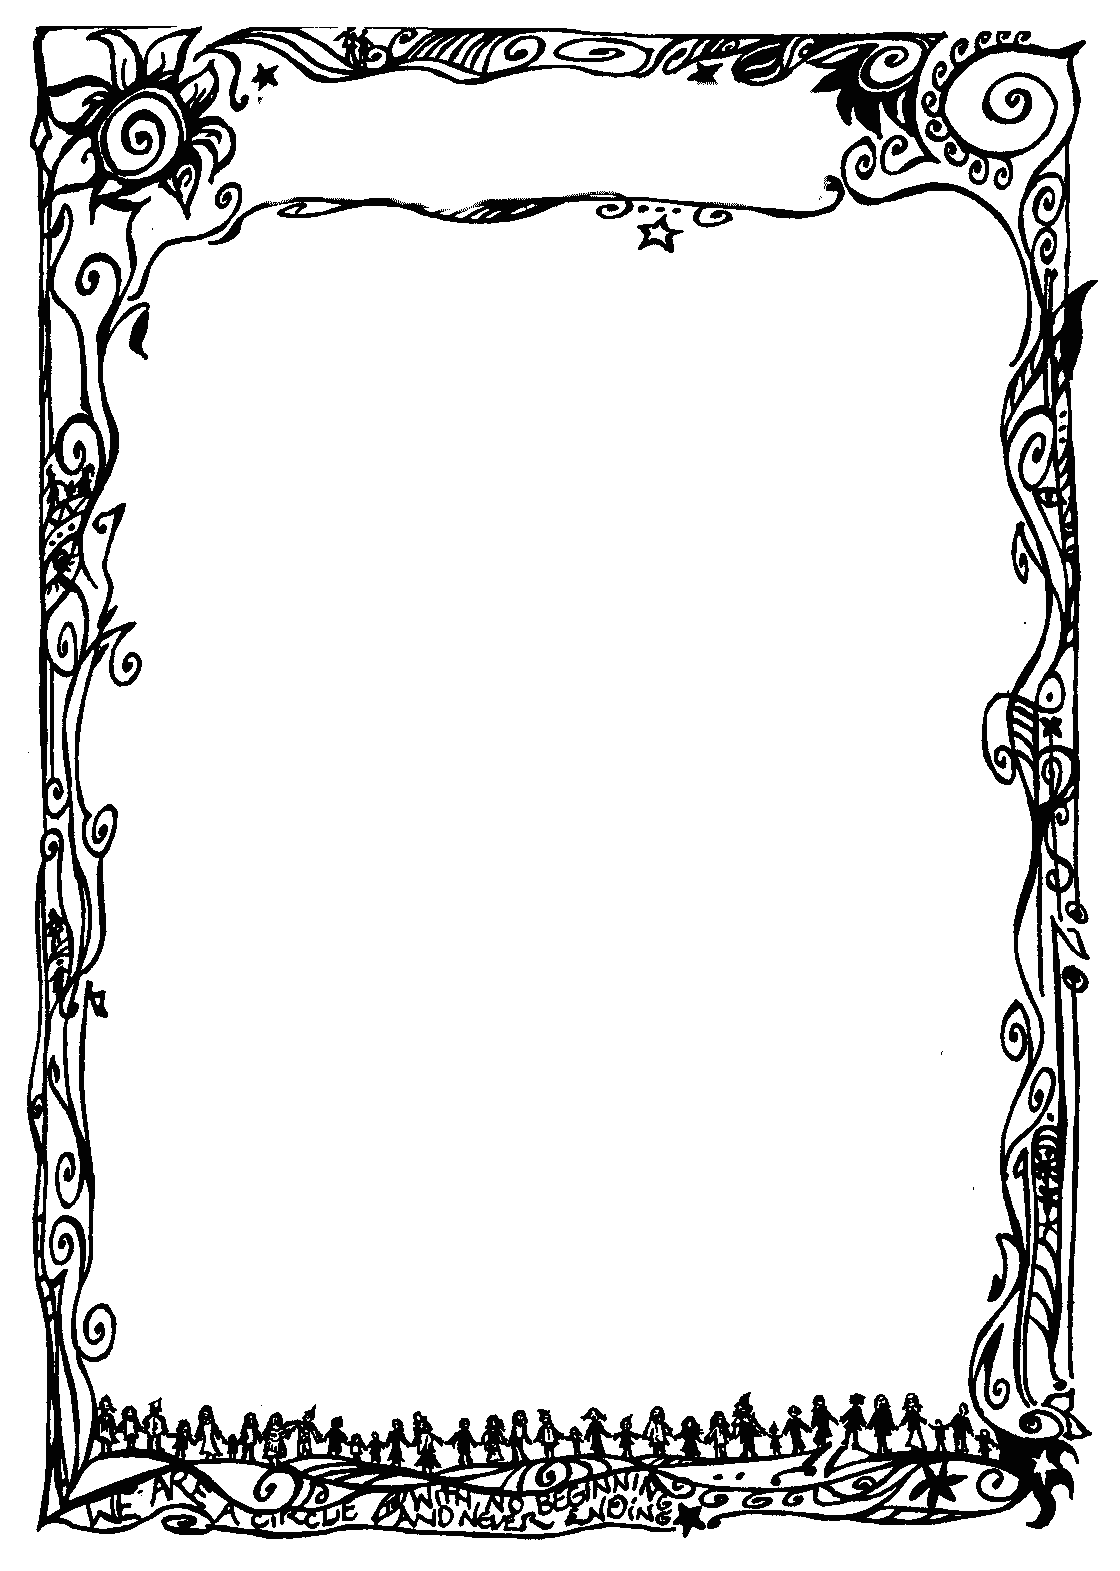 January Border And Frame Clipart.